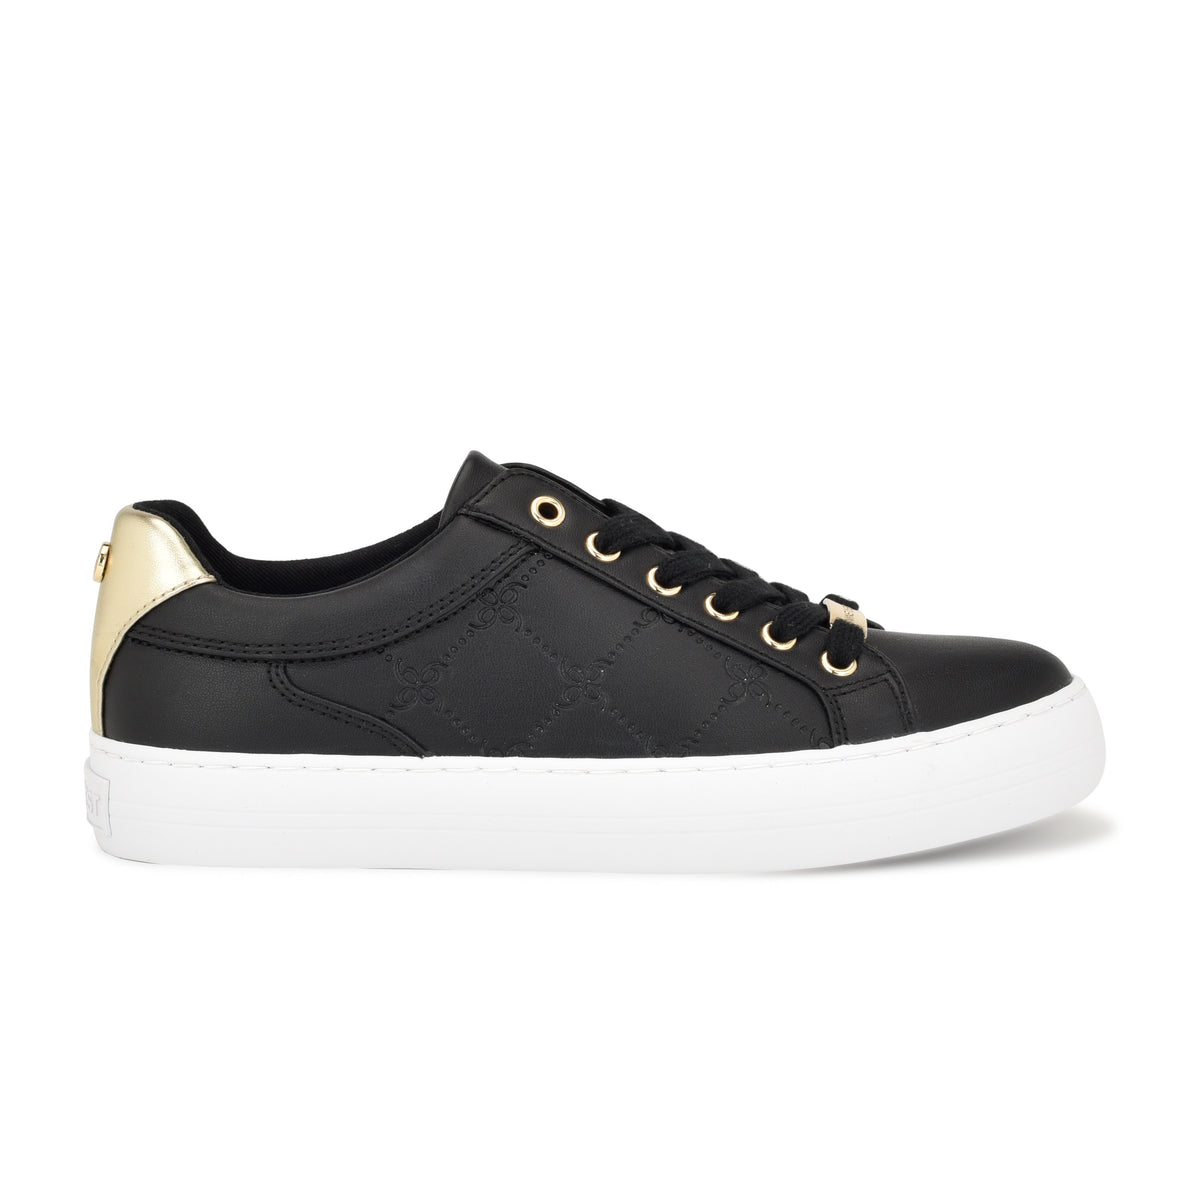 Givens Laceup Sneakers